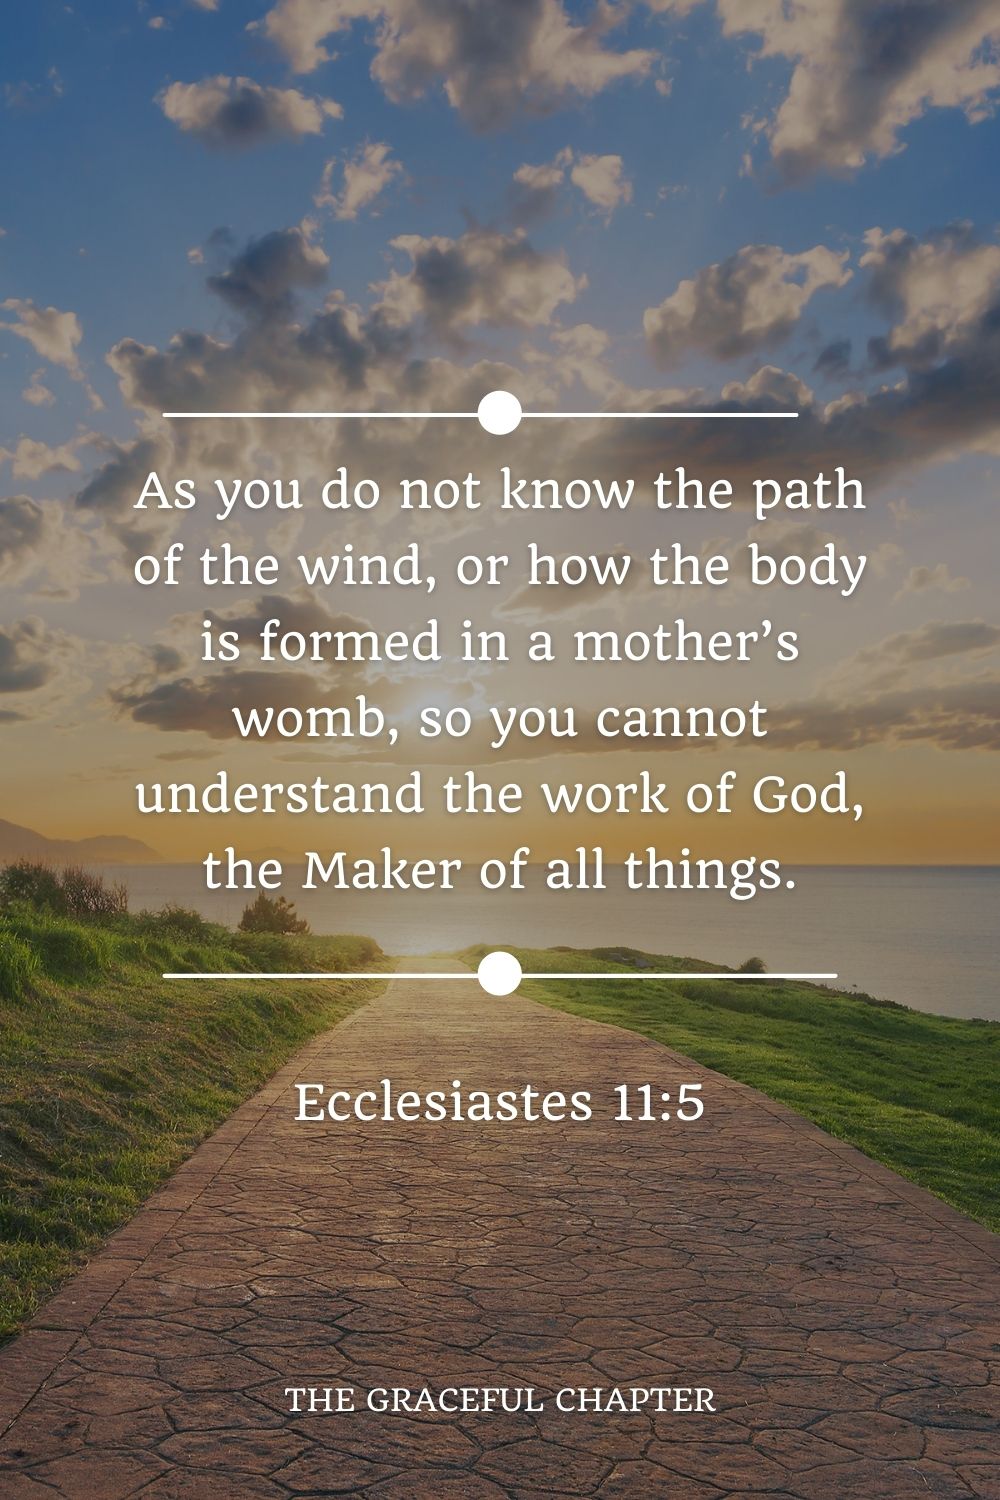 As you do not know the path of the wind, or how the body is formed in a mother’s womb, so you cannot understand the work of God, the Maker of all things. Ecclesiastes 11:5